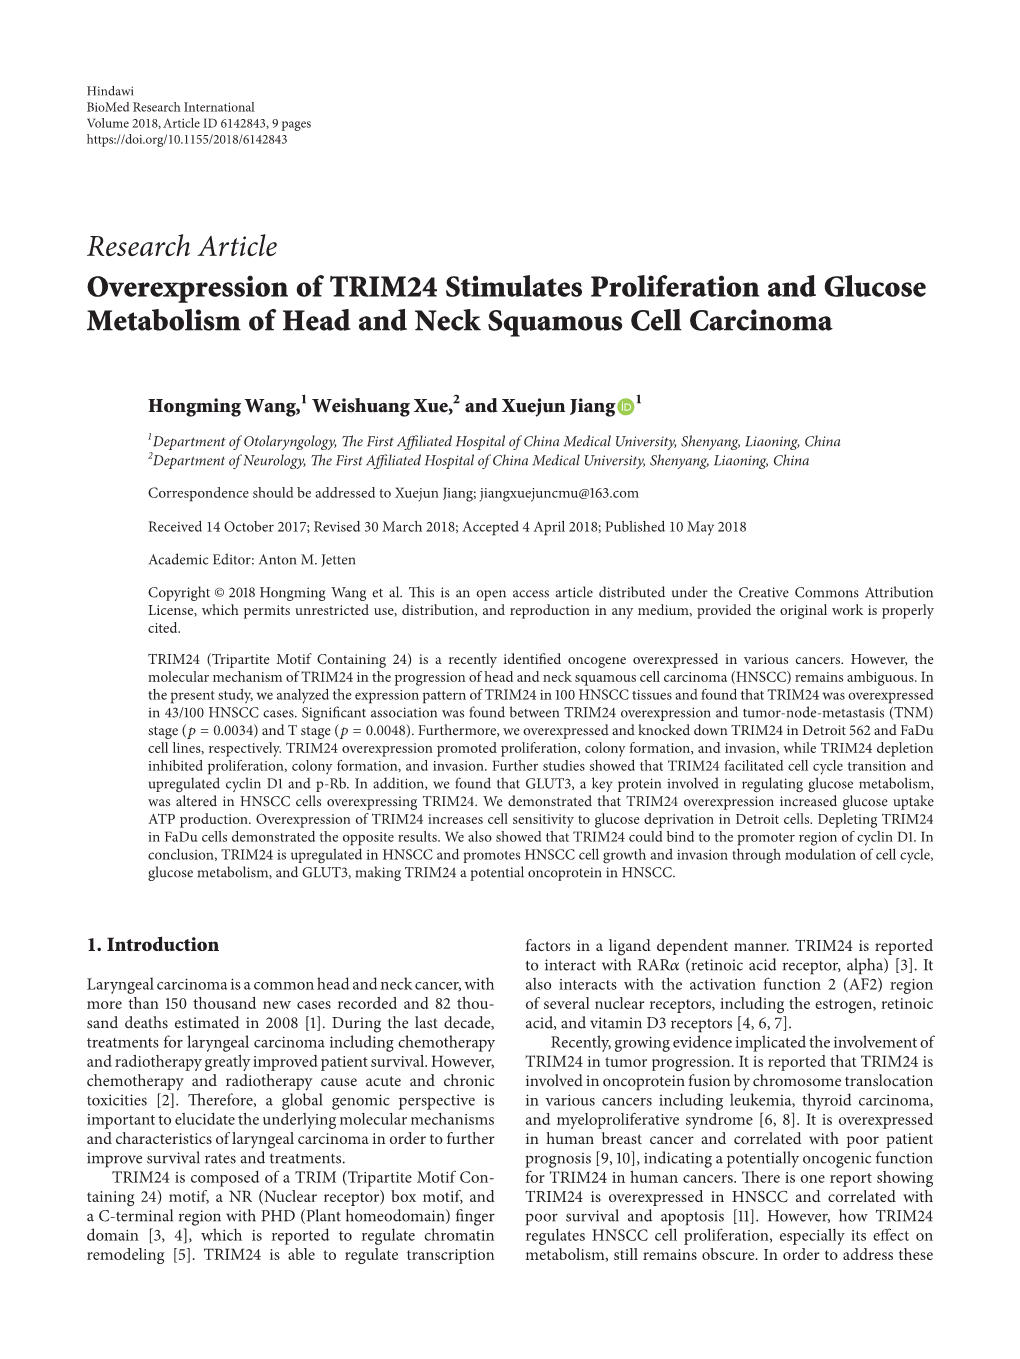 Overexpression of TRIM24 Stimulates Proliferation and Glucose Metabolism of Head and Neck Squamous Cell Carcinoma